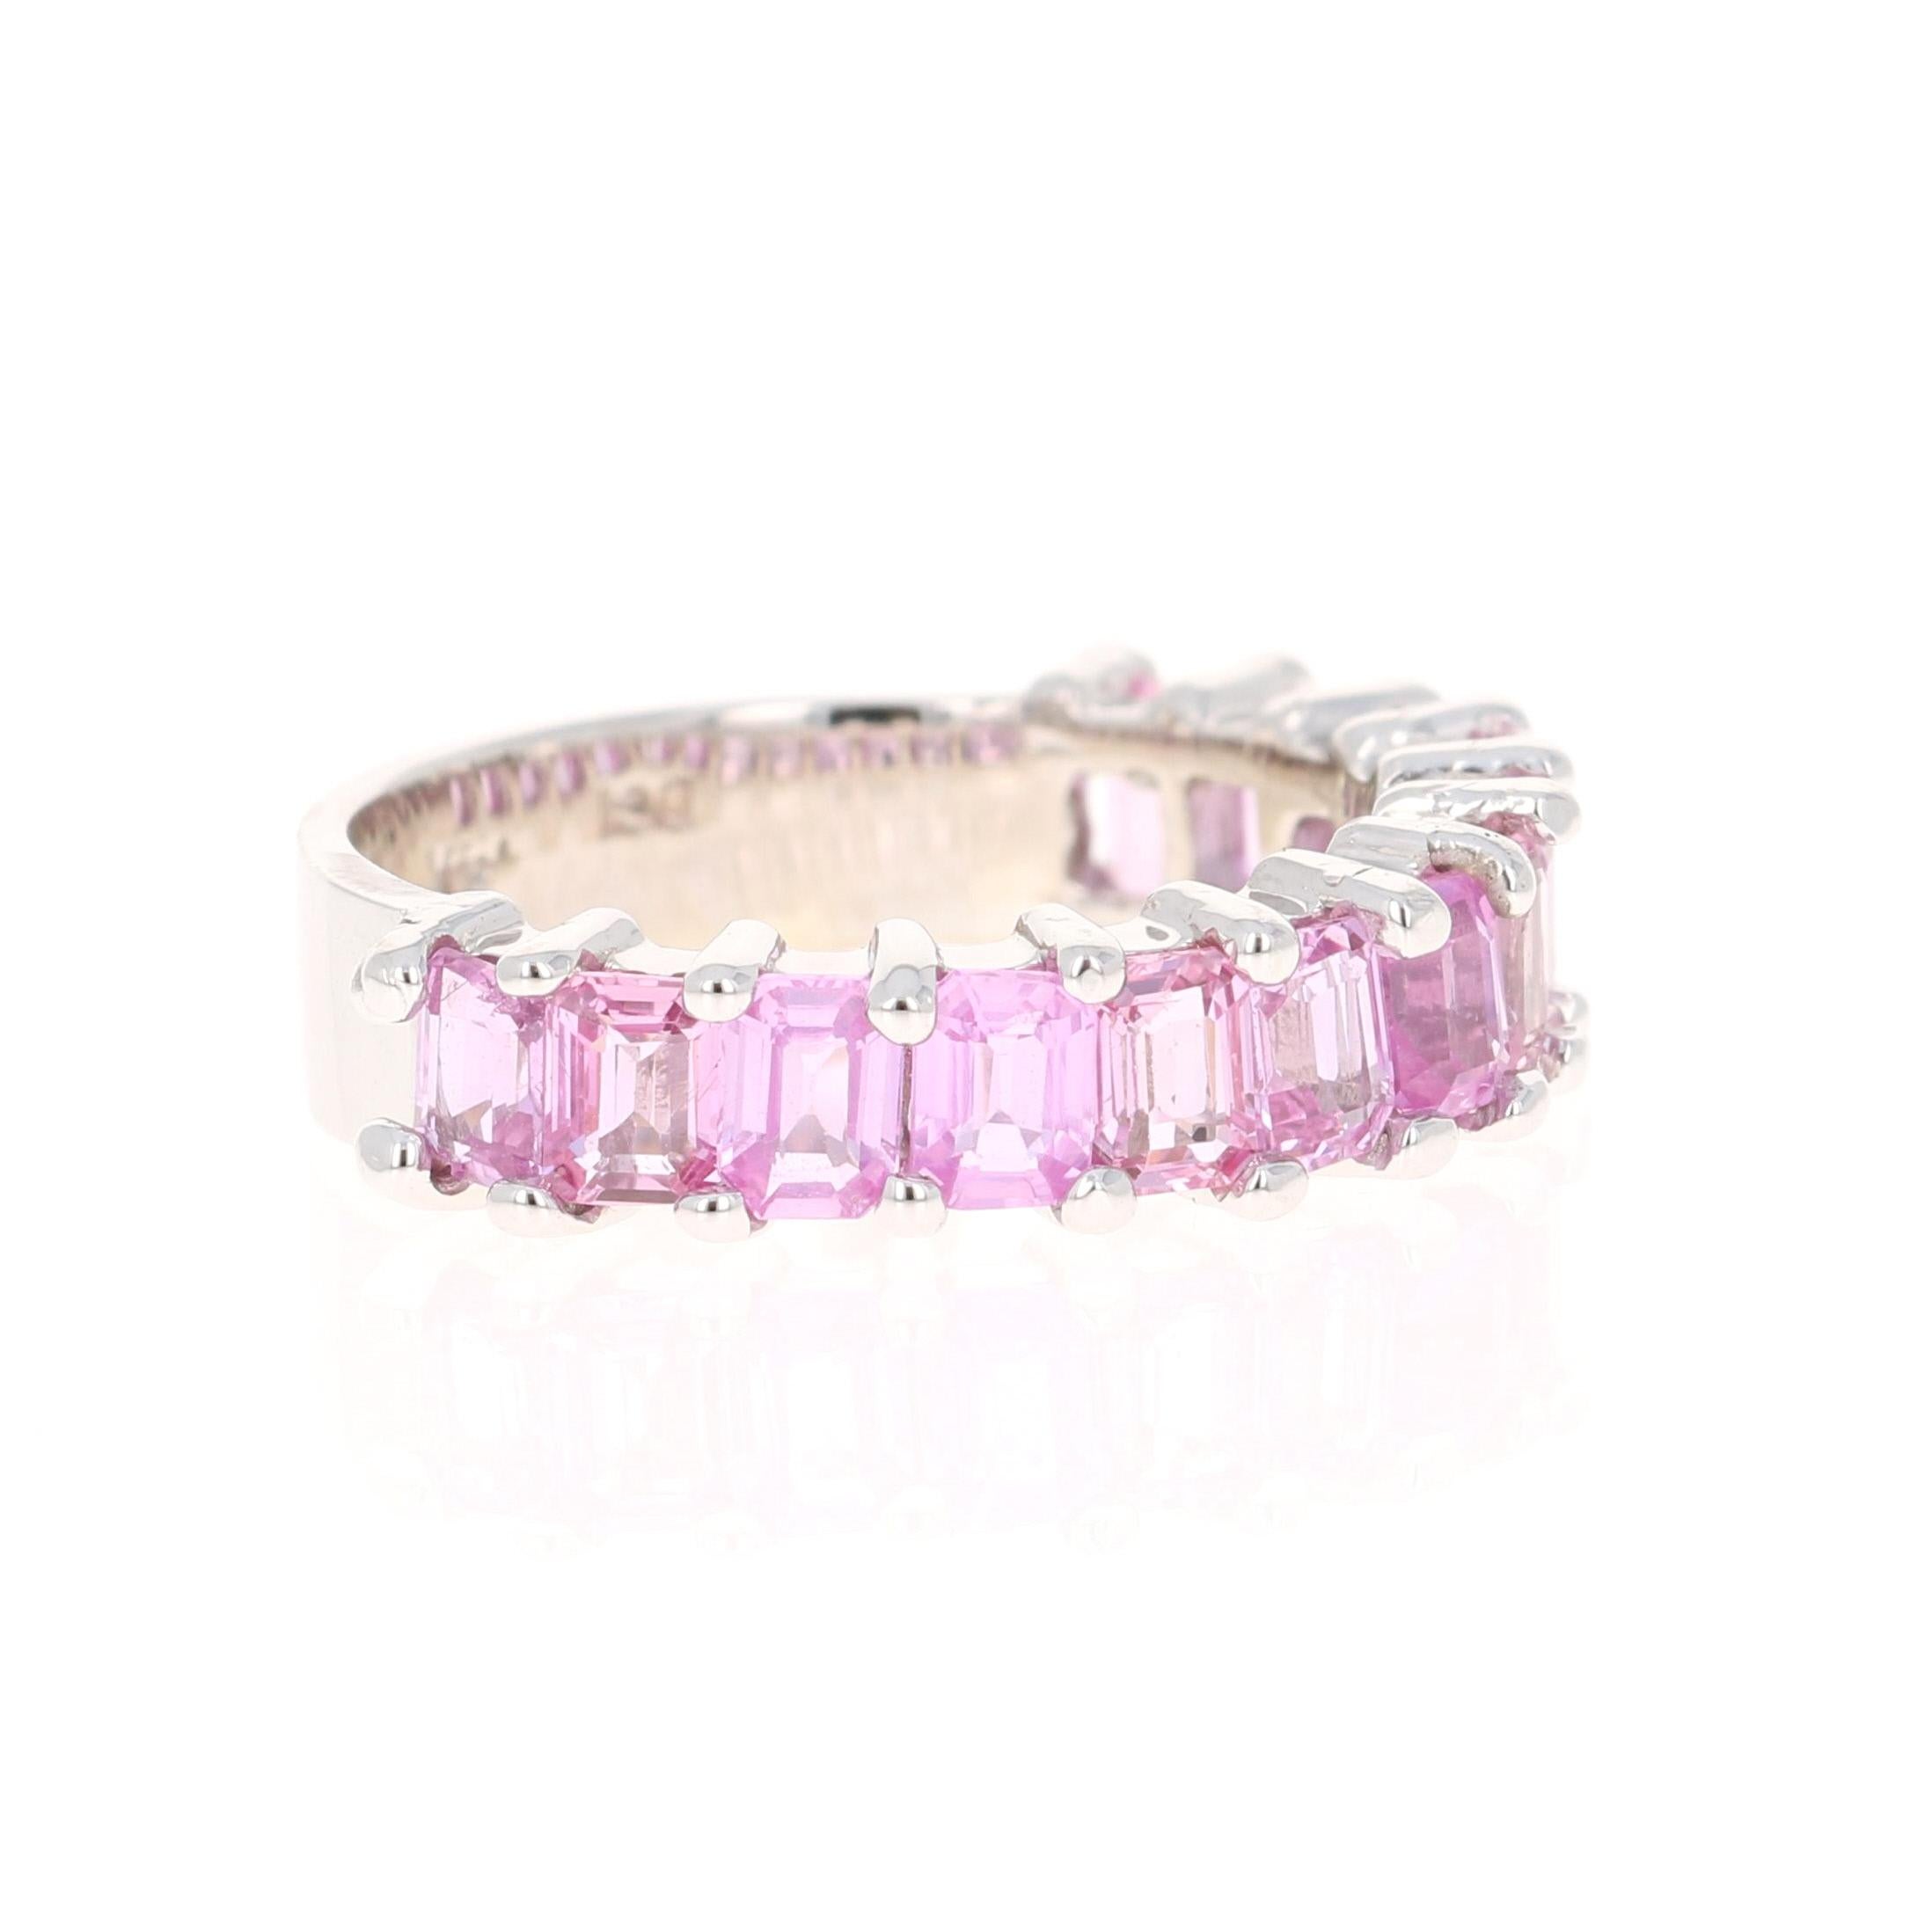 This ring has 13 Emerald Cut Pink Sapphires that weighs 3.44 Carats. 

Crafted in 18 Karat White Gold and weighs approximately 4.8 grams 

The ring is a size 7 and can be re-sized at no additional charge